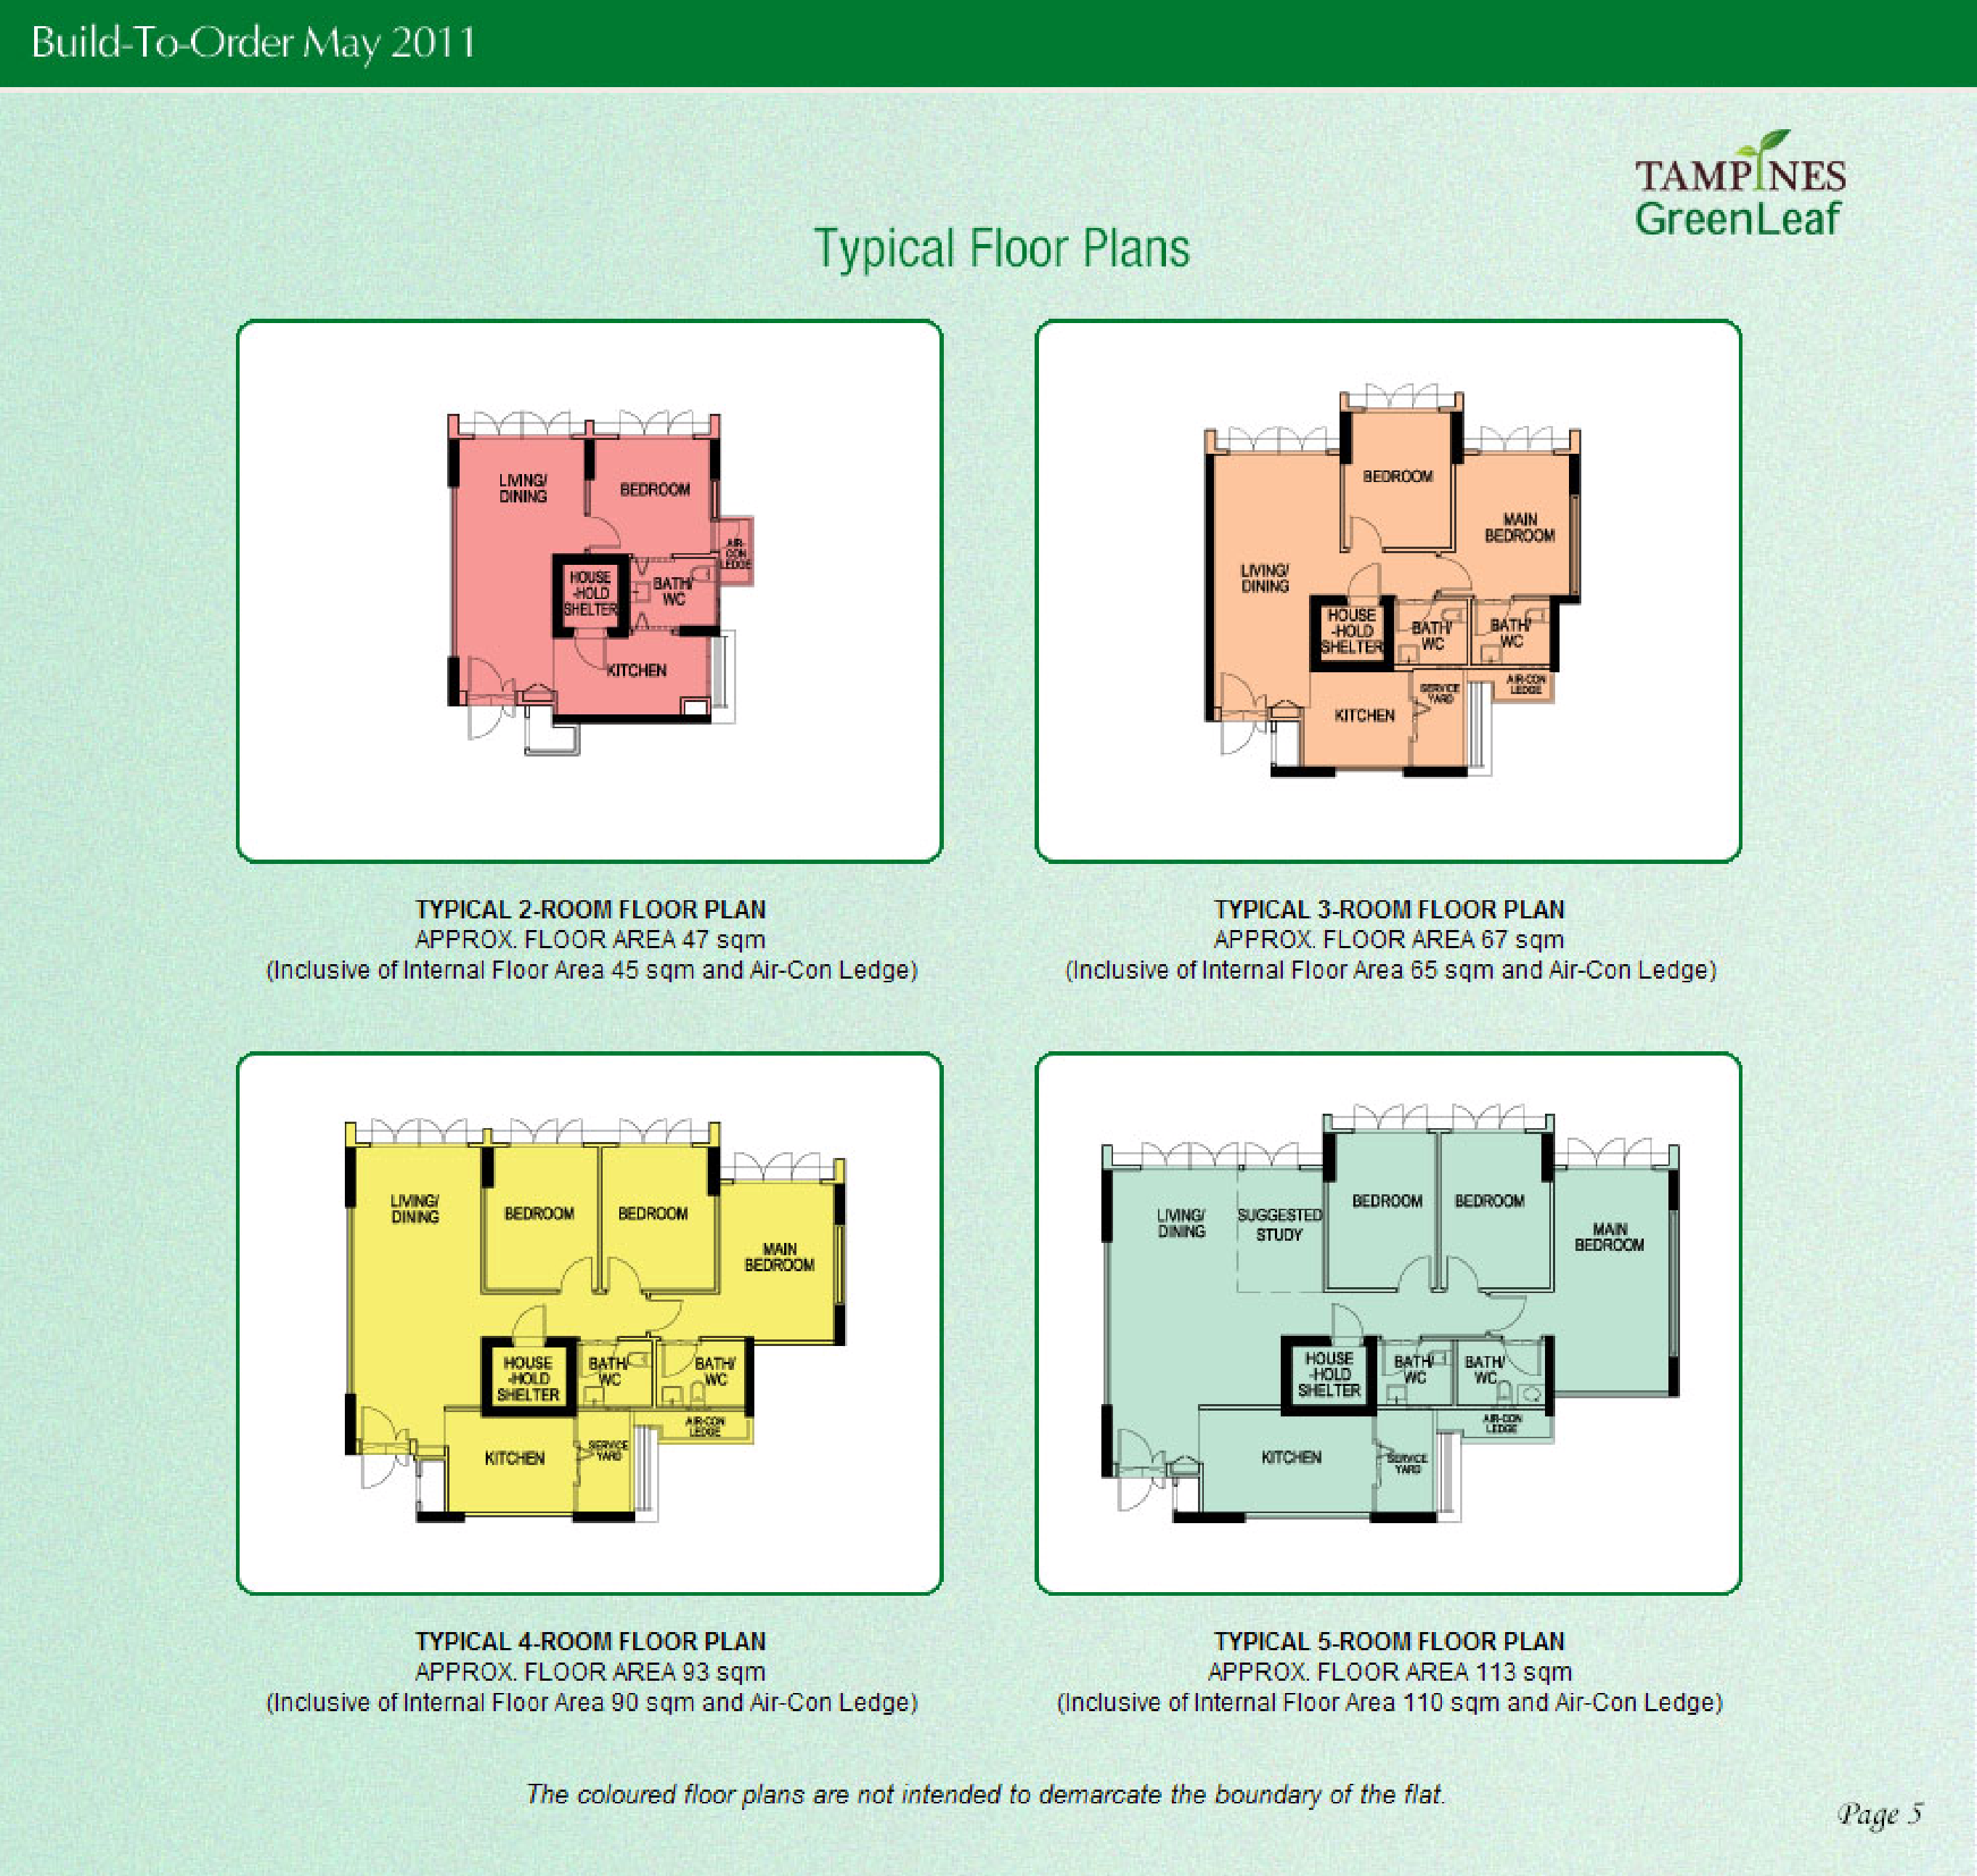 HDB Tampines Greenleaf BTO launched in May 2011 site plan